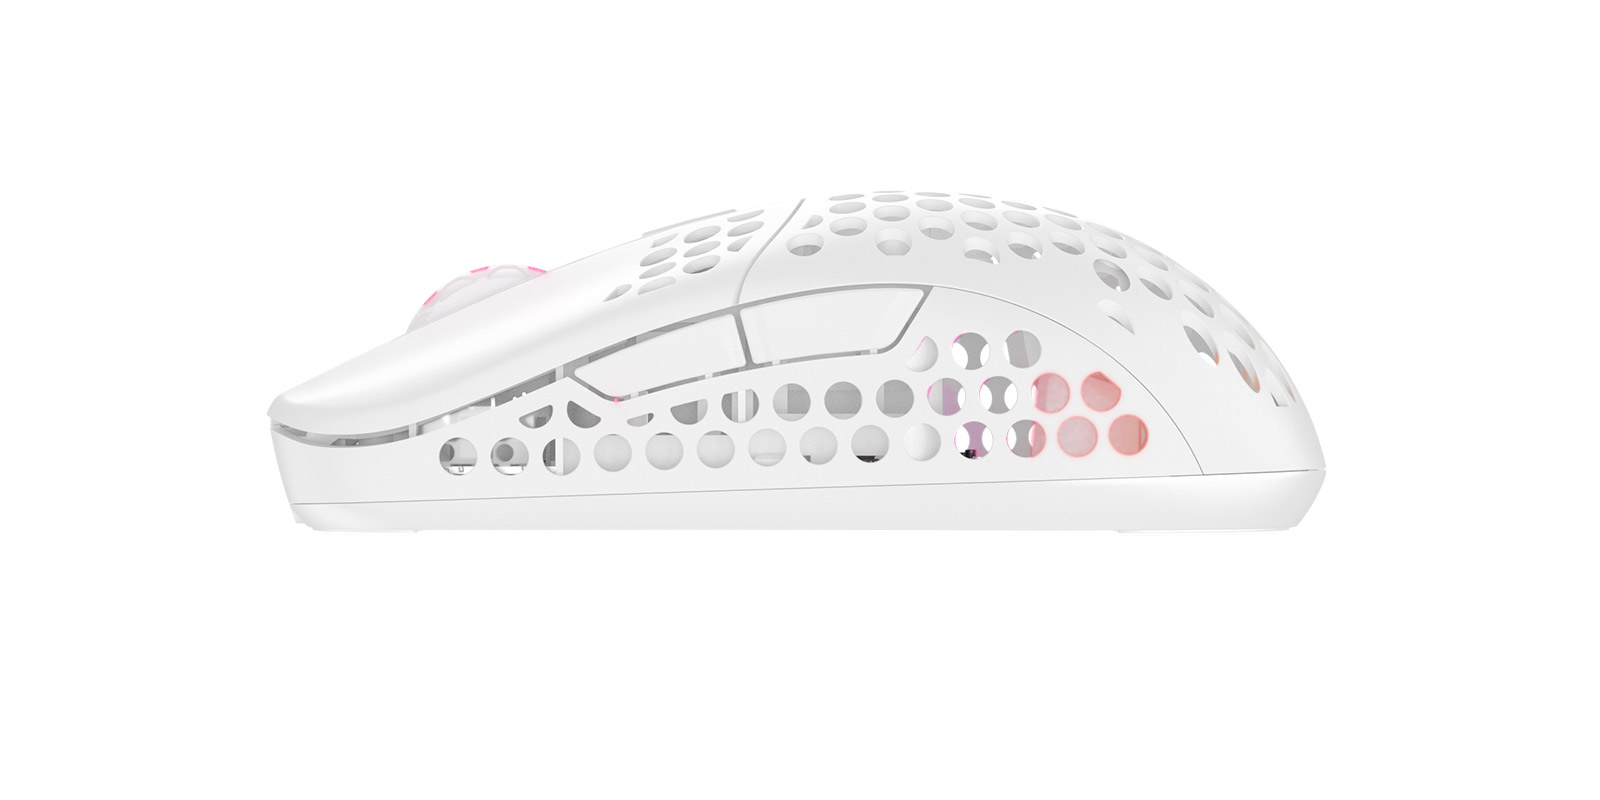 M42-Wireless-White-Gaming-Mouse_gallery04.jpg